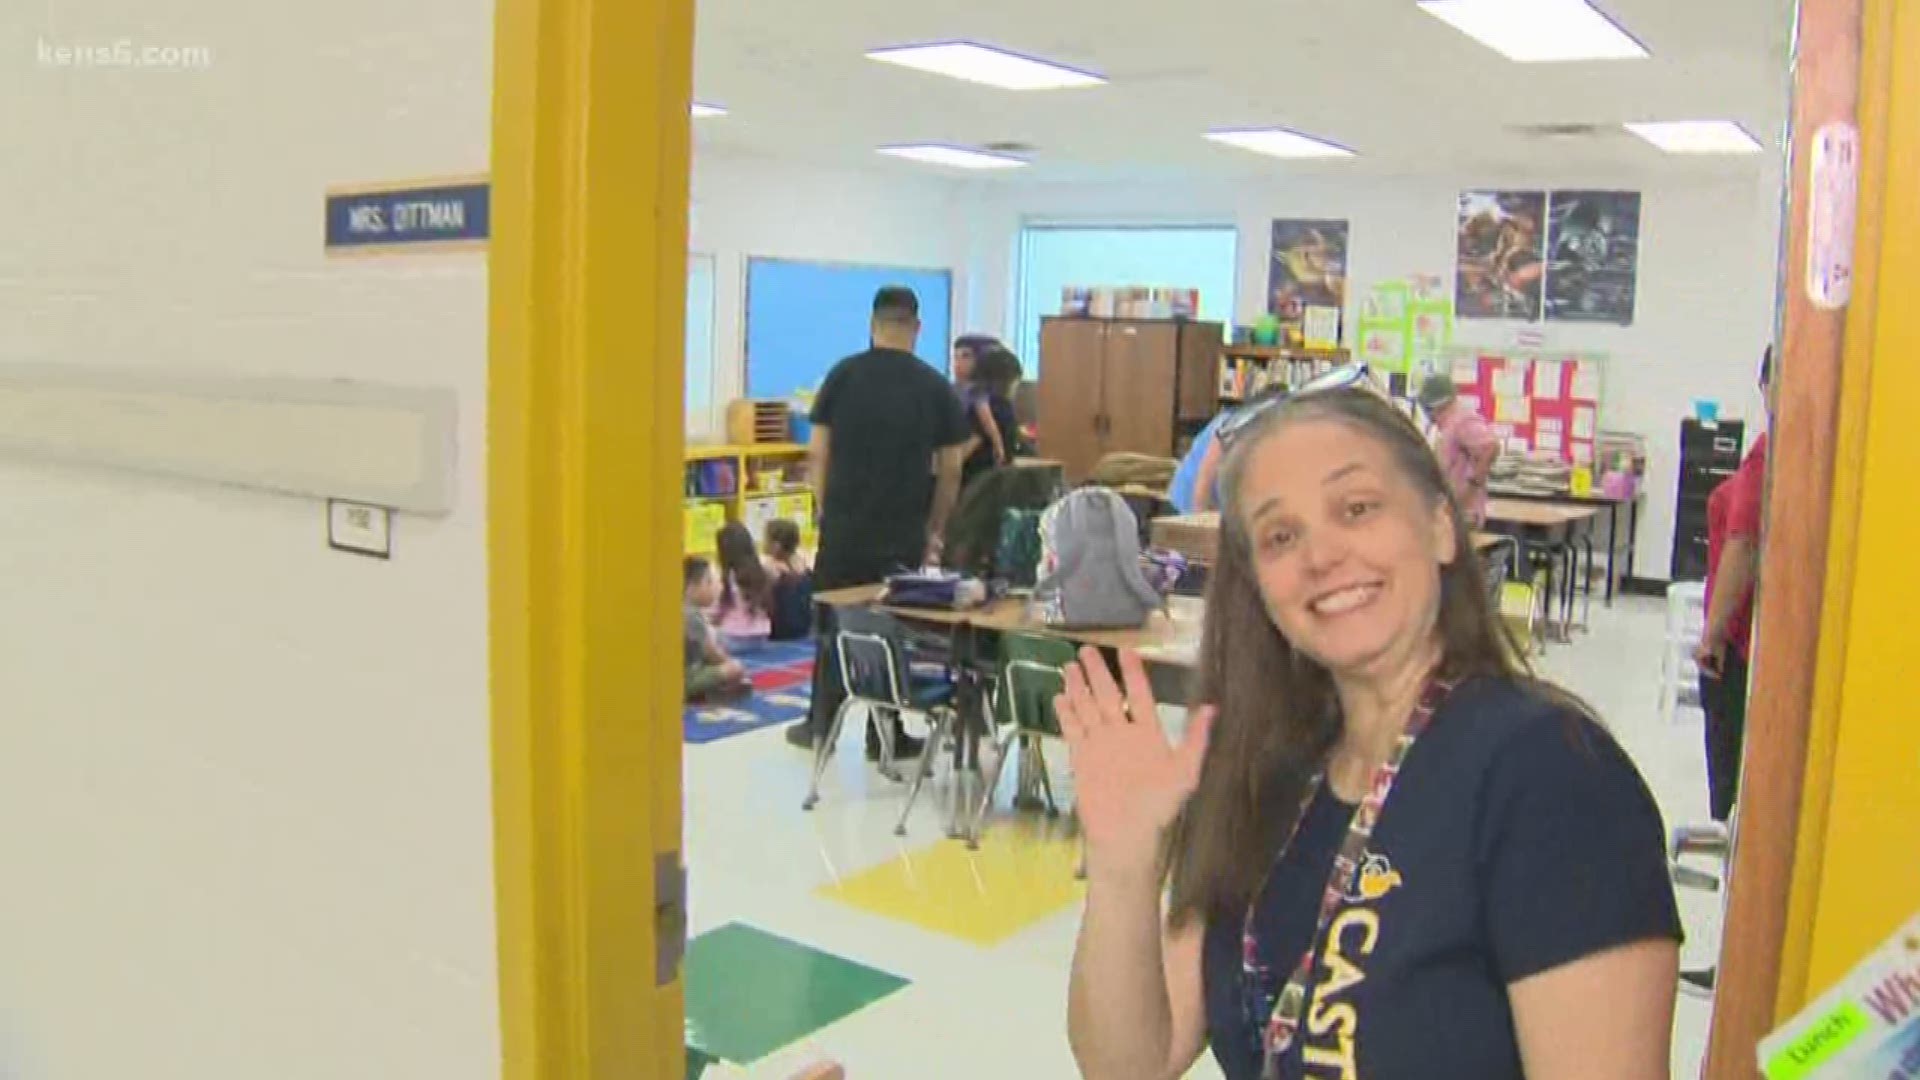 It's back to books for students at Castle Hills Elementary School -- the only "year round" school in North East ISD. Eyewitness News reporter Charlie Cooper has more.